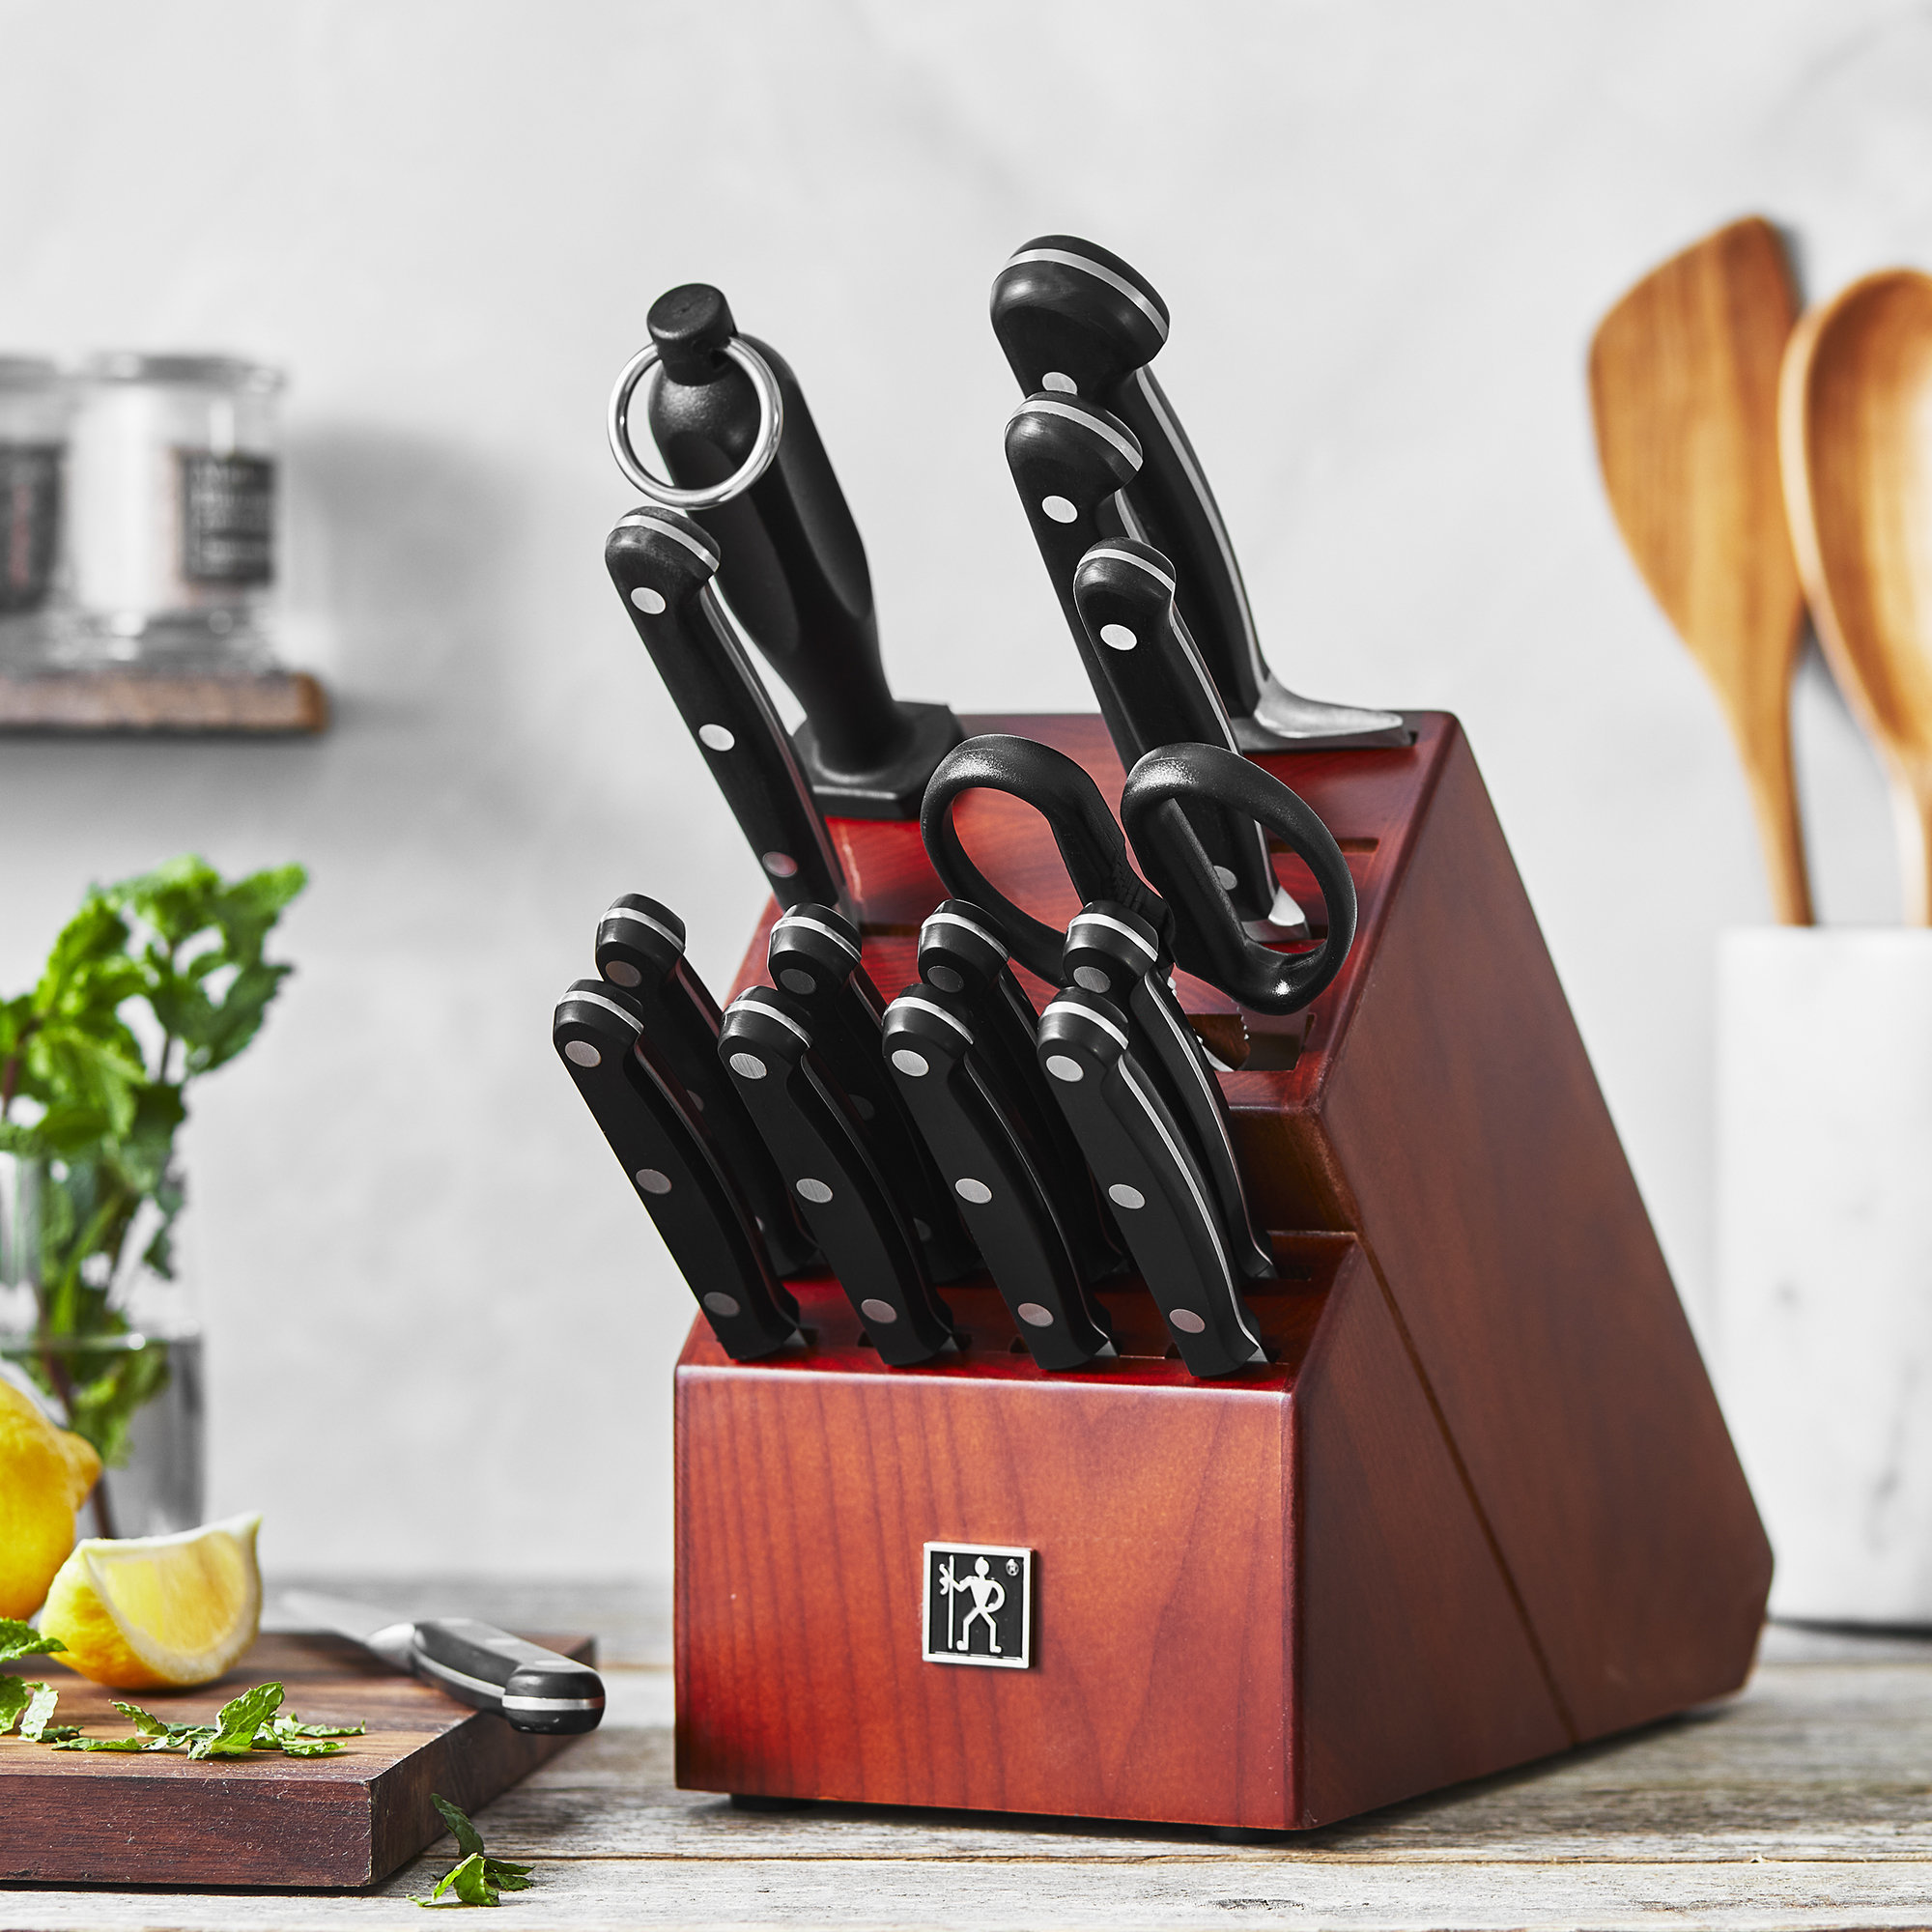 HENCKELS Statement Razor-Sharp 20-Piece Knife Set with Block, Chef Knife,  Bread Knife, German Engineered Knife Informed by over 100 Years of Mastery